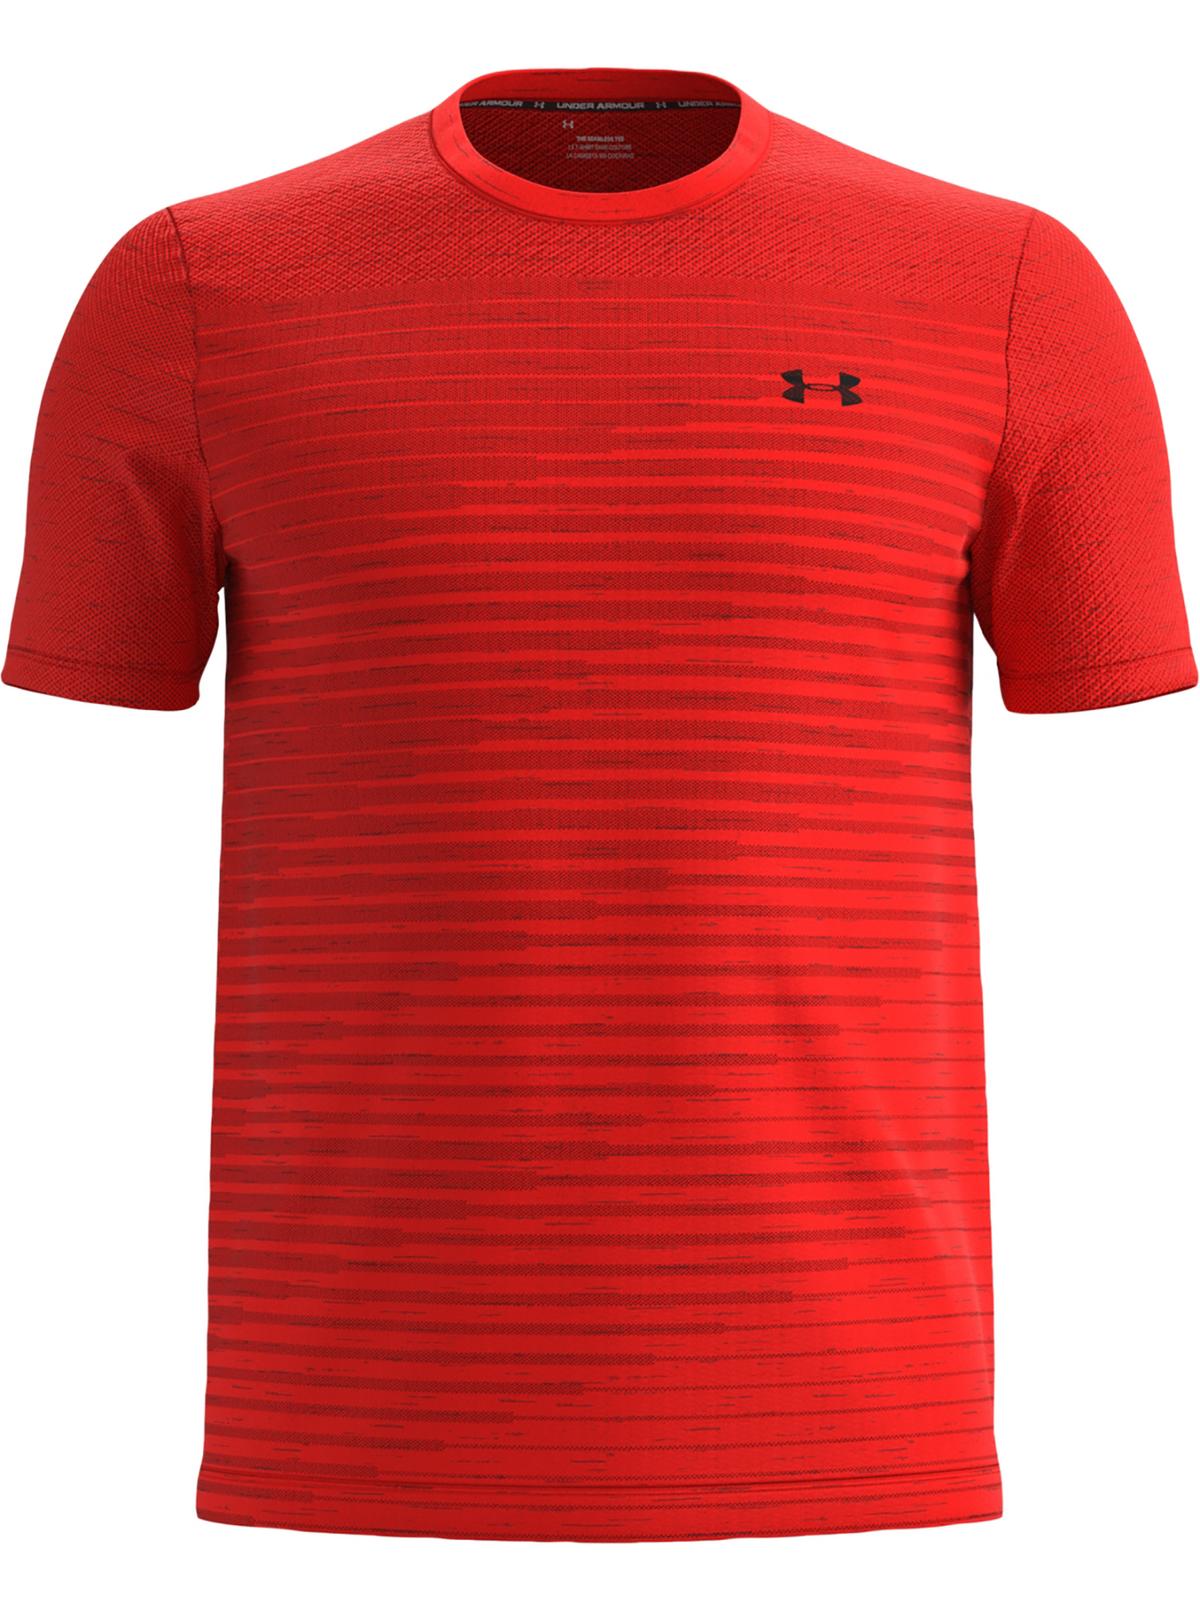 Under Armour Mens Fade Mesh T-shirt In Multi